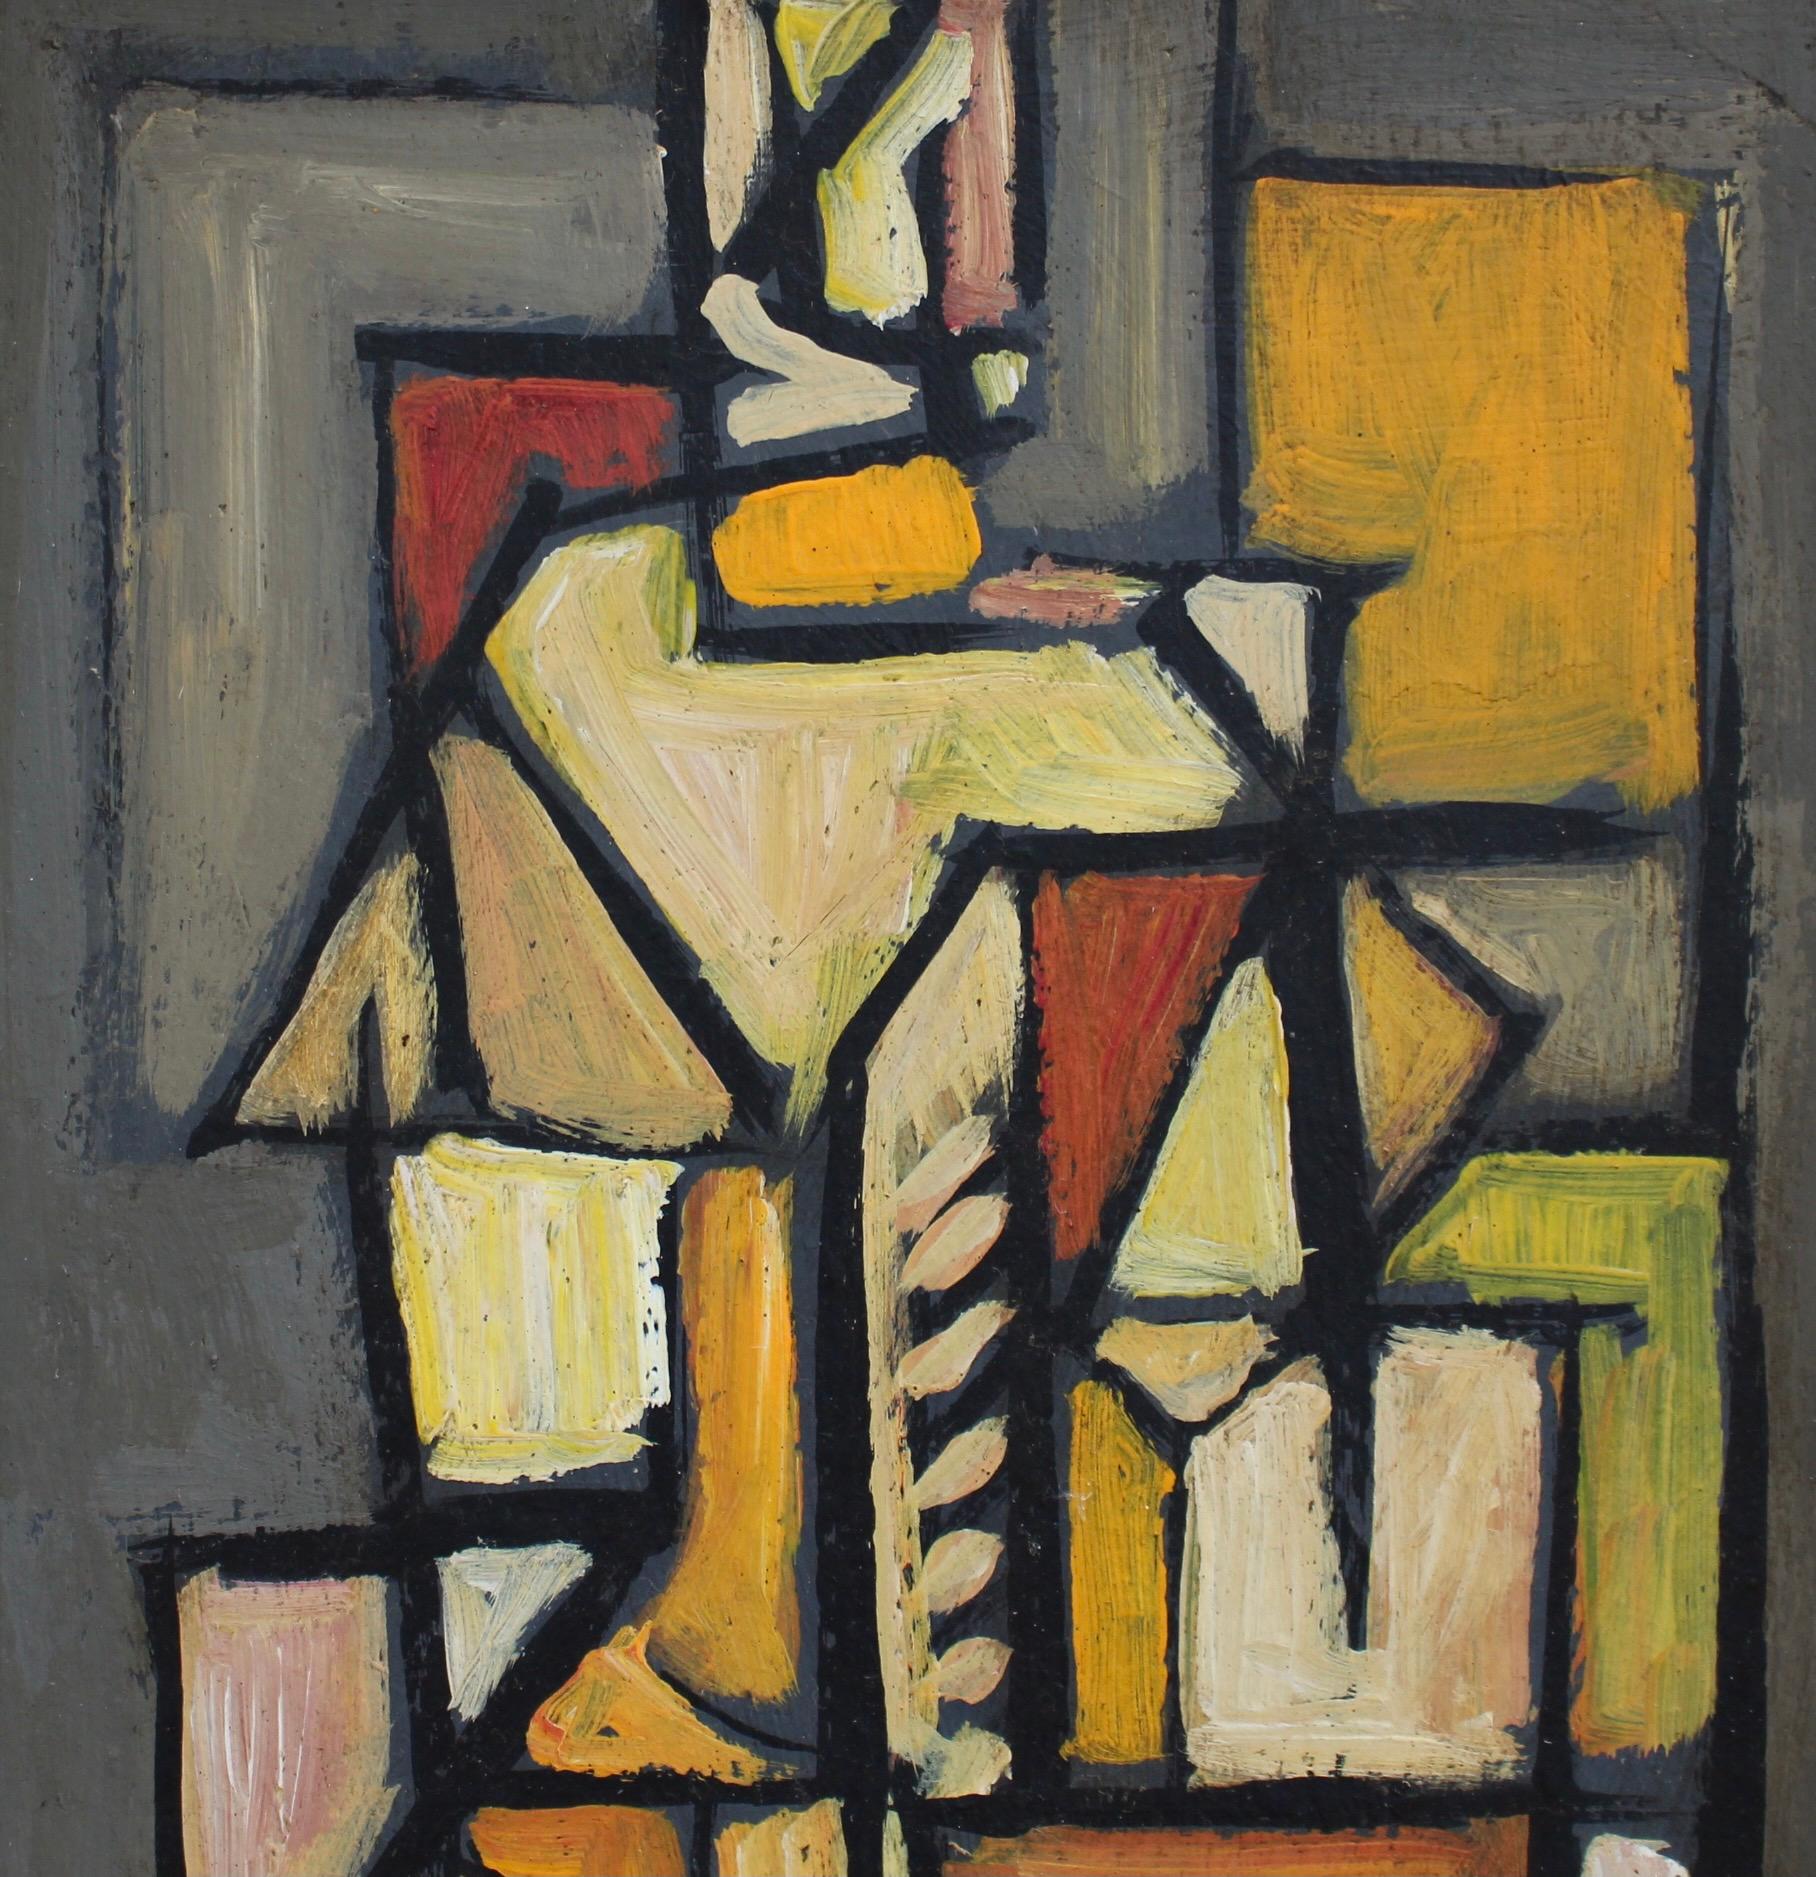 'Cubist Figure', oil on board, by STM (circa 1960s). A stunning Mid-Century Modern painting by artist with the initials STM. Clearly inspired by cubists Picasso and Braque, the artist uses angles, lines and subdued earth tones to create this